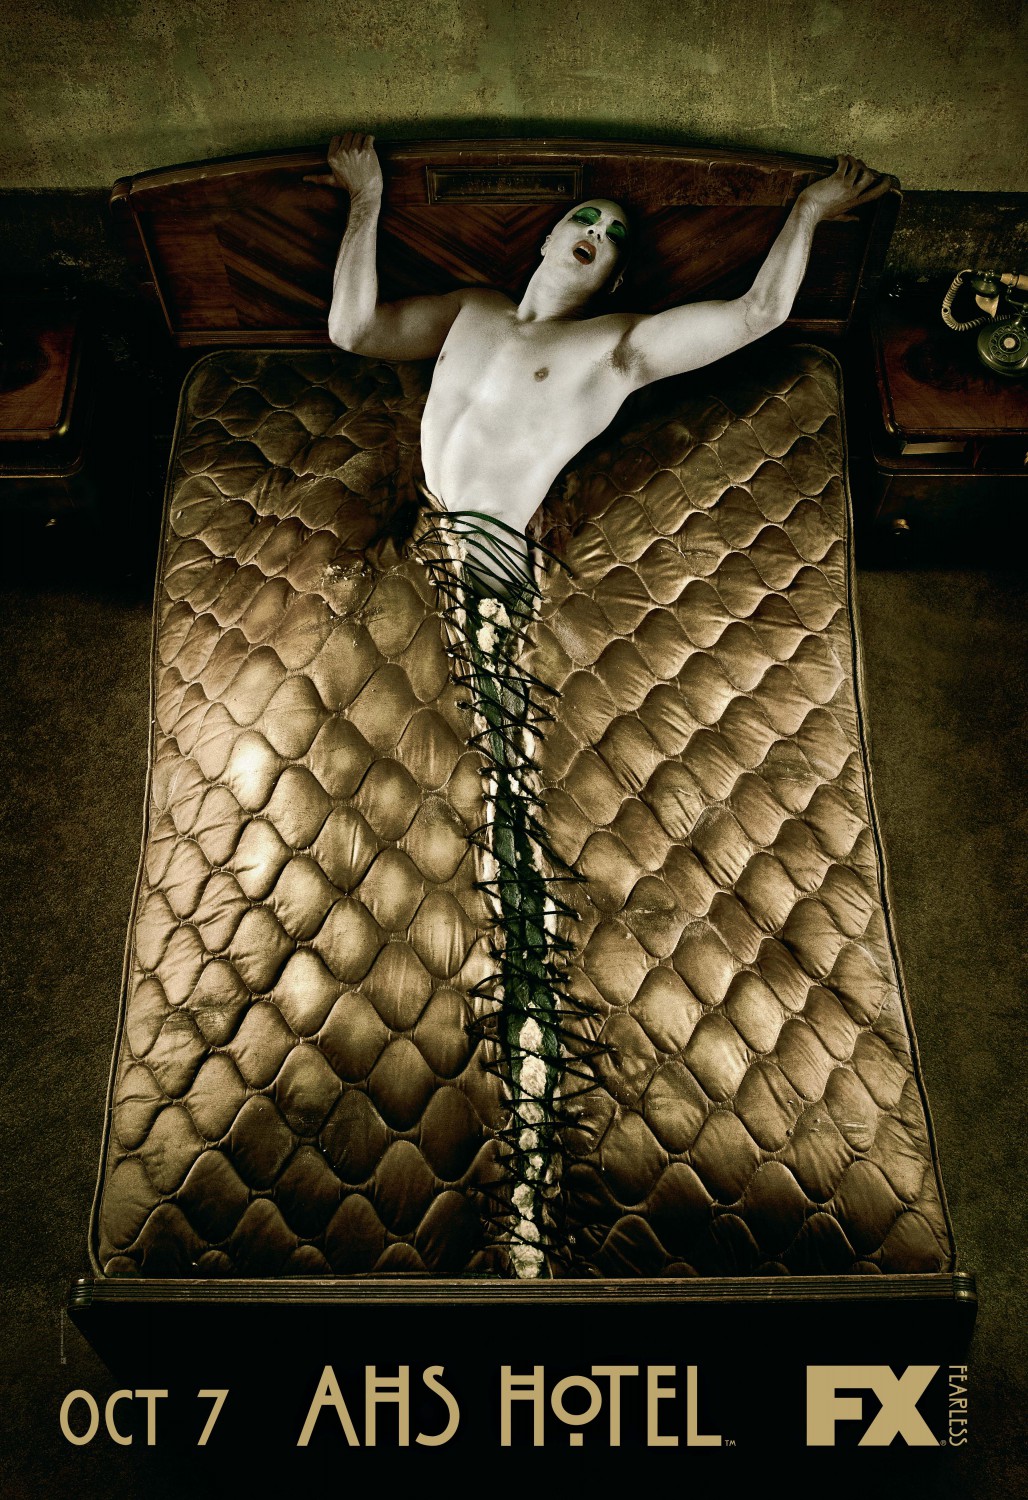 Extra Large TV Poster Image for American Horror Story (#43 of 176)